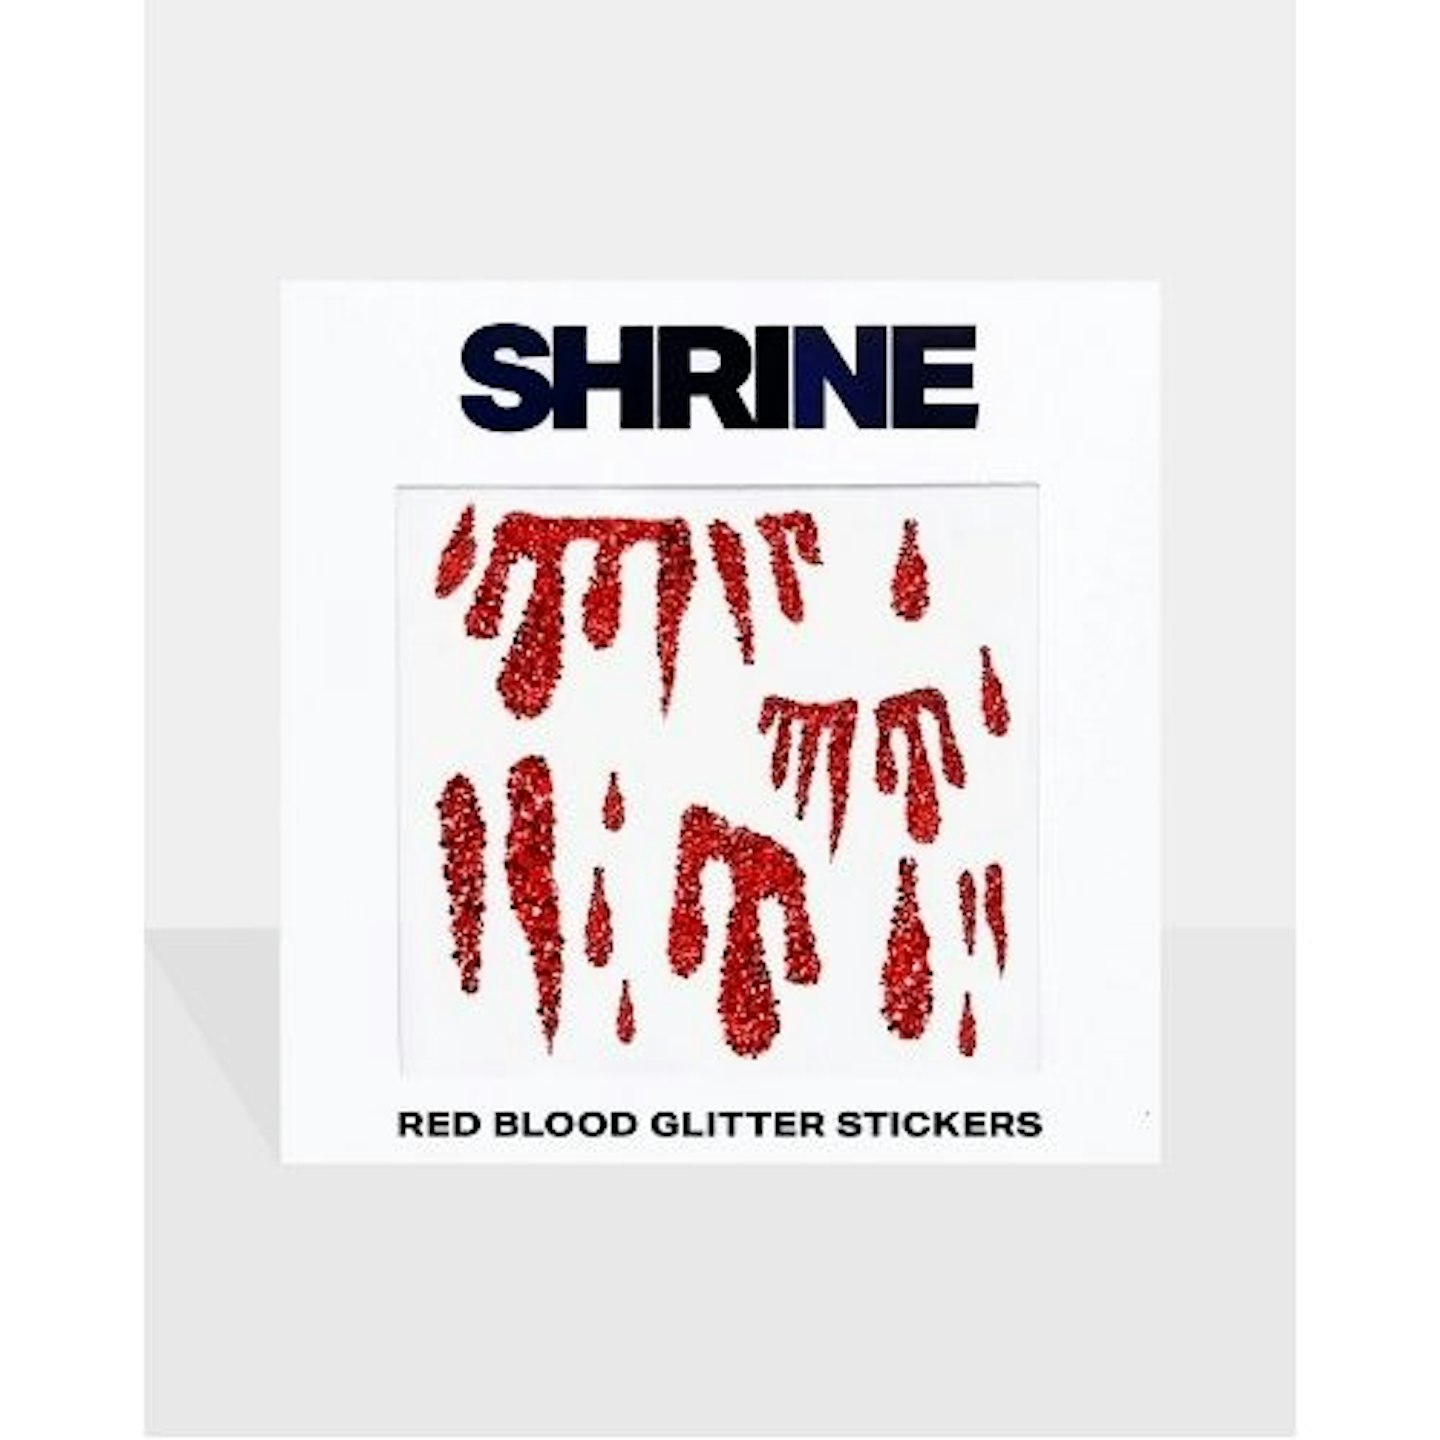 Red Blood Glitter Stickers